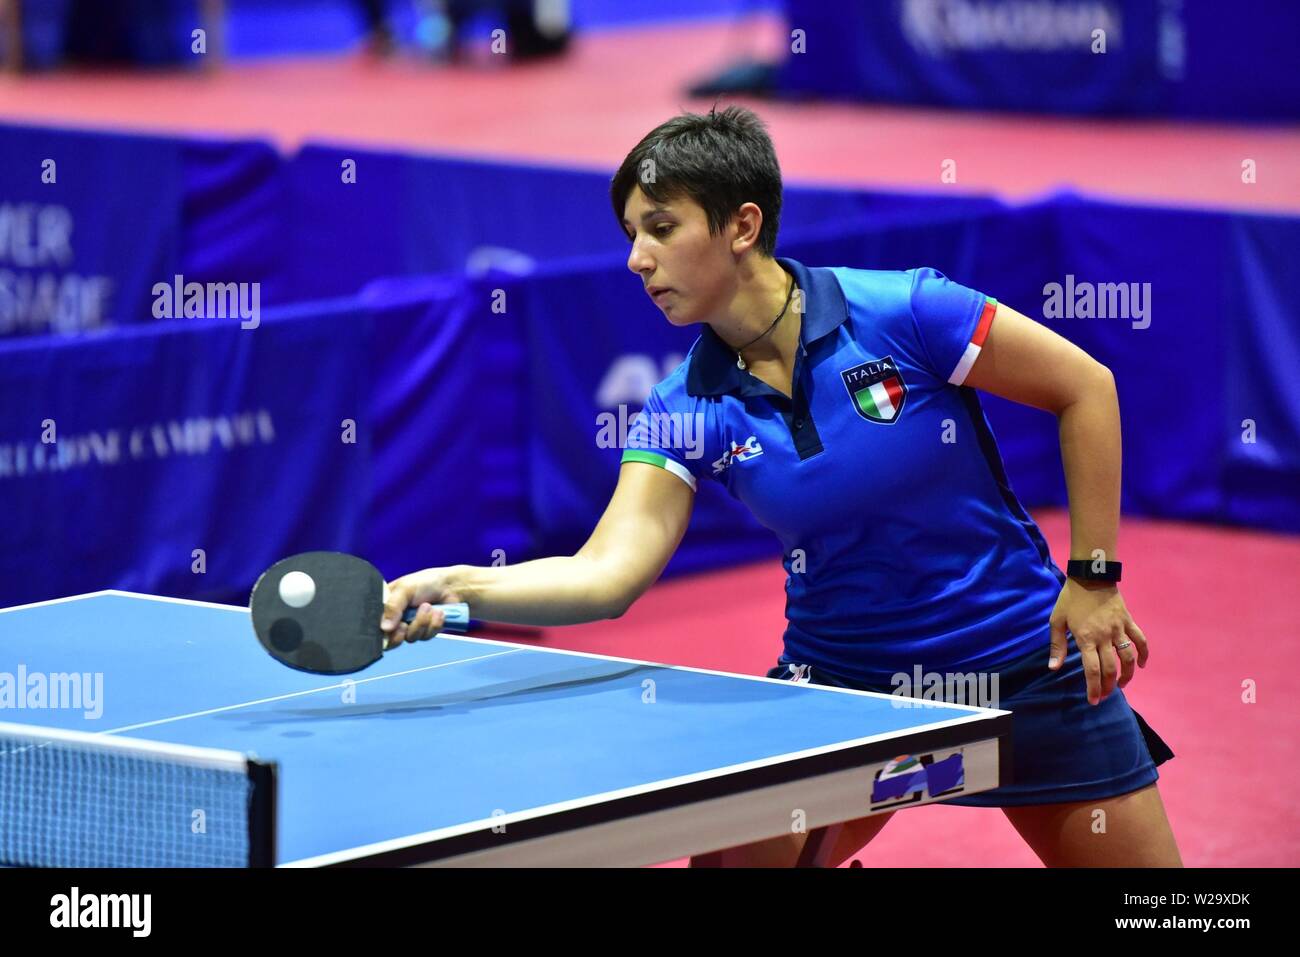 Pozzuoli, Italy. 07th July, 2019. The italian player Veronica Mosconi  during the match of table tennis of Summer Universiade match between Italy  and Poland at the PalaTrincone in Pozzuoli (Napoli) . Credit: